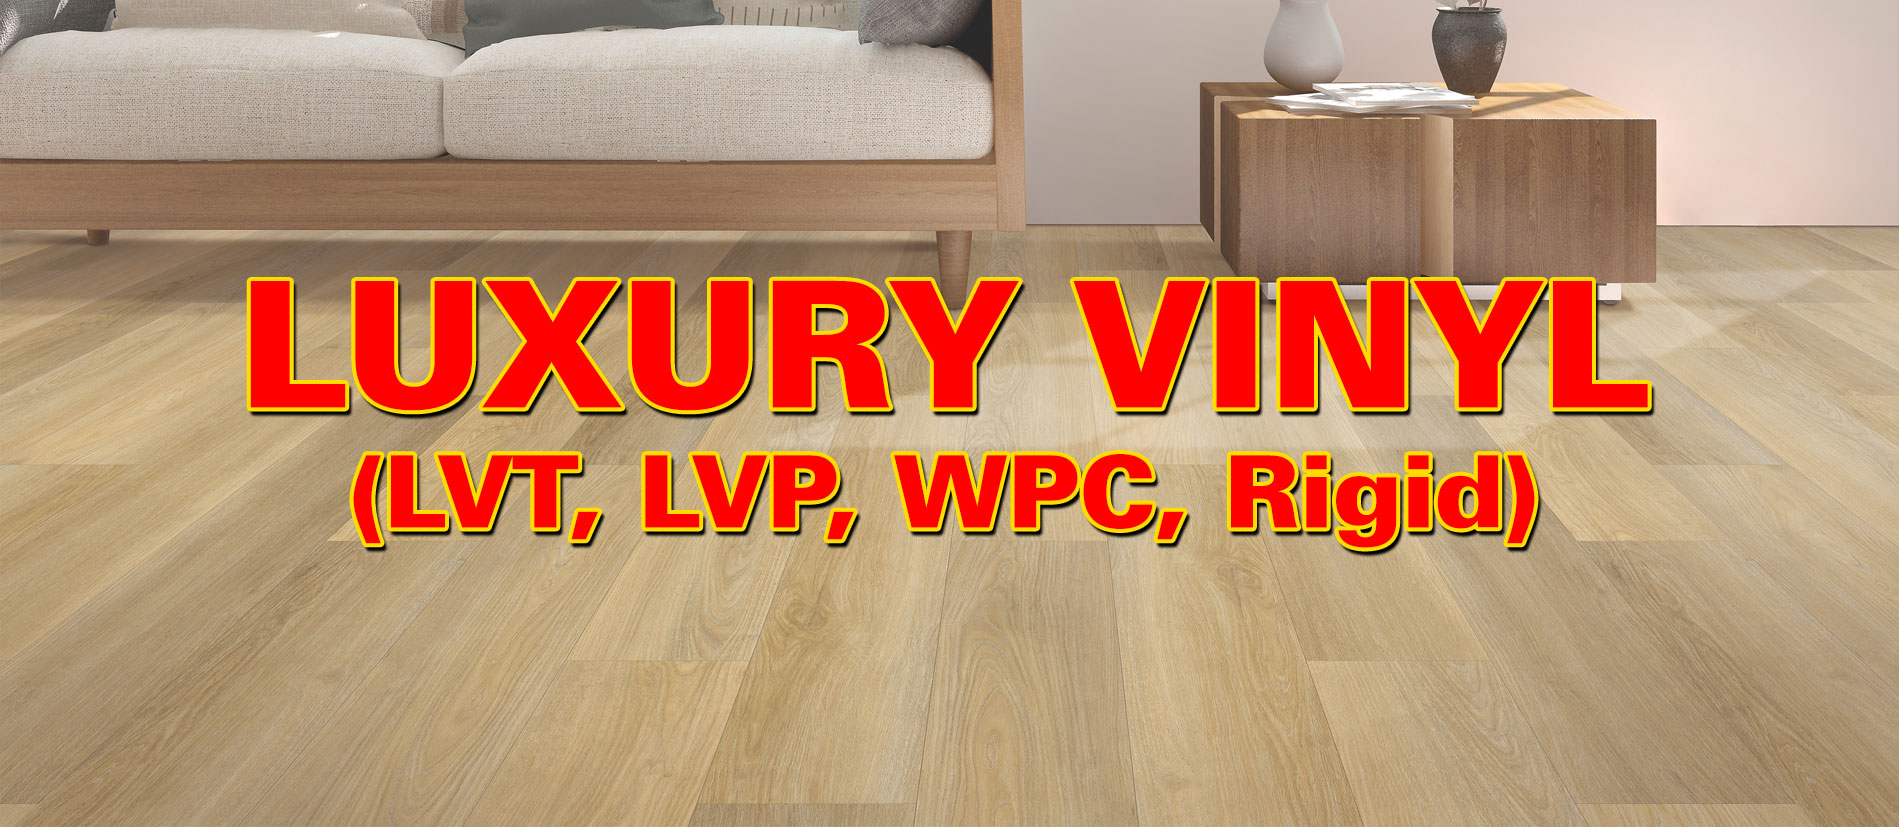 LVP Luxury Vinyl Plank and LVT Luxury Vinyl Tile Cleaning - Fort Wayne's  Quality Cleaner of Carpet, Rugs, Upholstery, Tile and Grout, Pet Stains and  Odor. Water Damage Restoration - Distinctive Cleaning